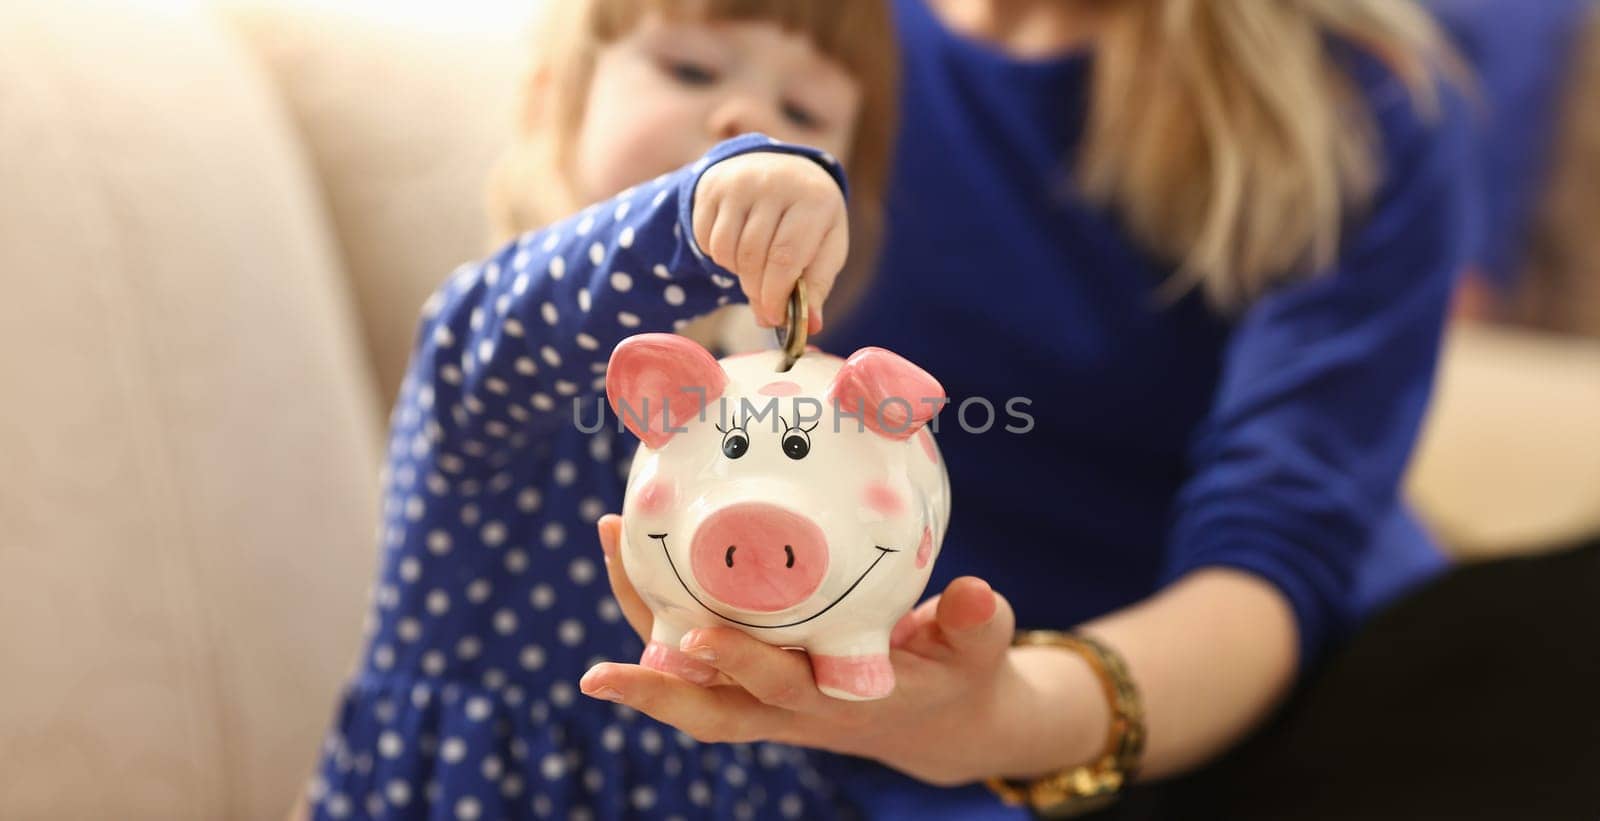 Child little girl arm putting coins into piggybank by kuprevich